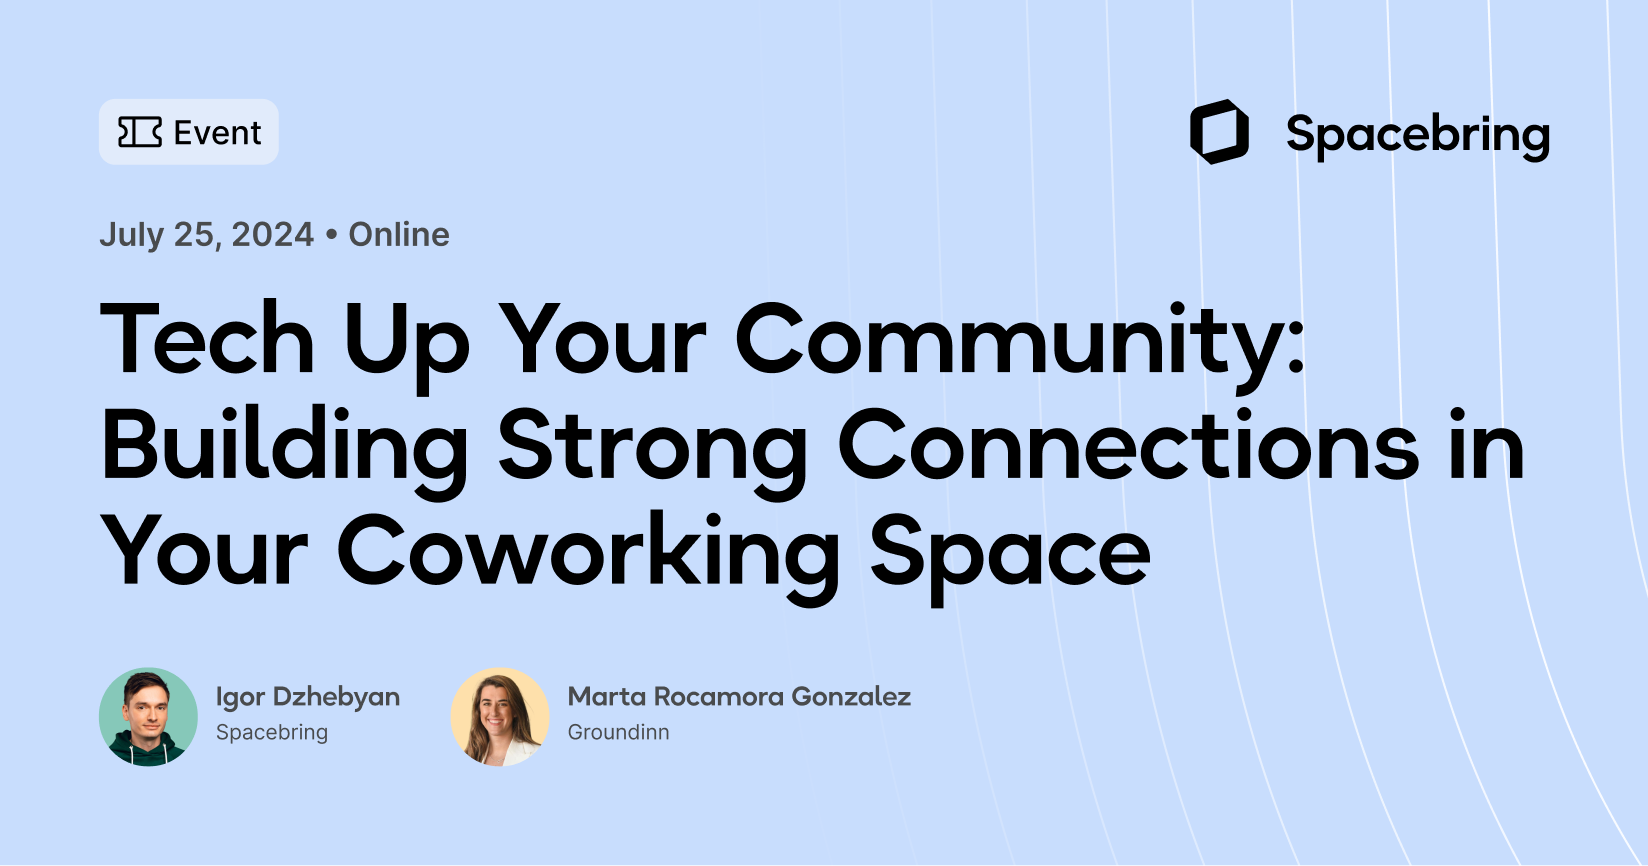 Tech Up Your Community: Building Strong Connections in Your Coworking Space